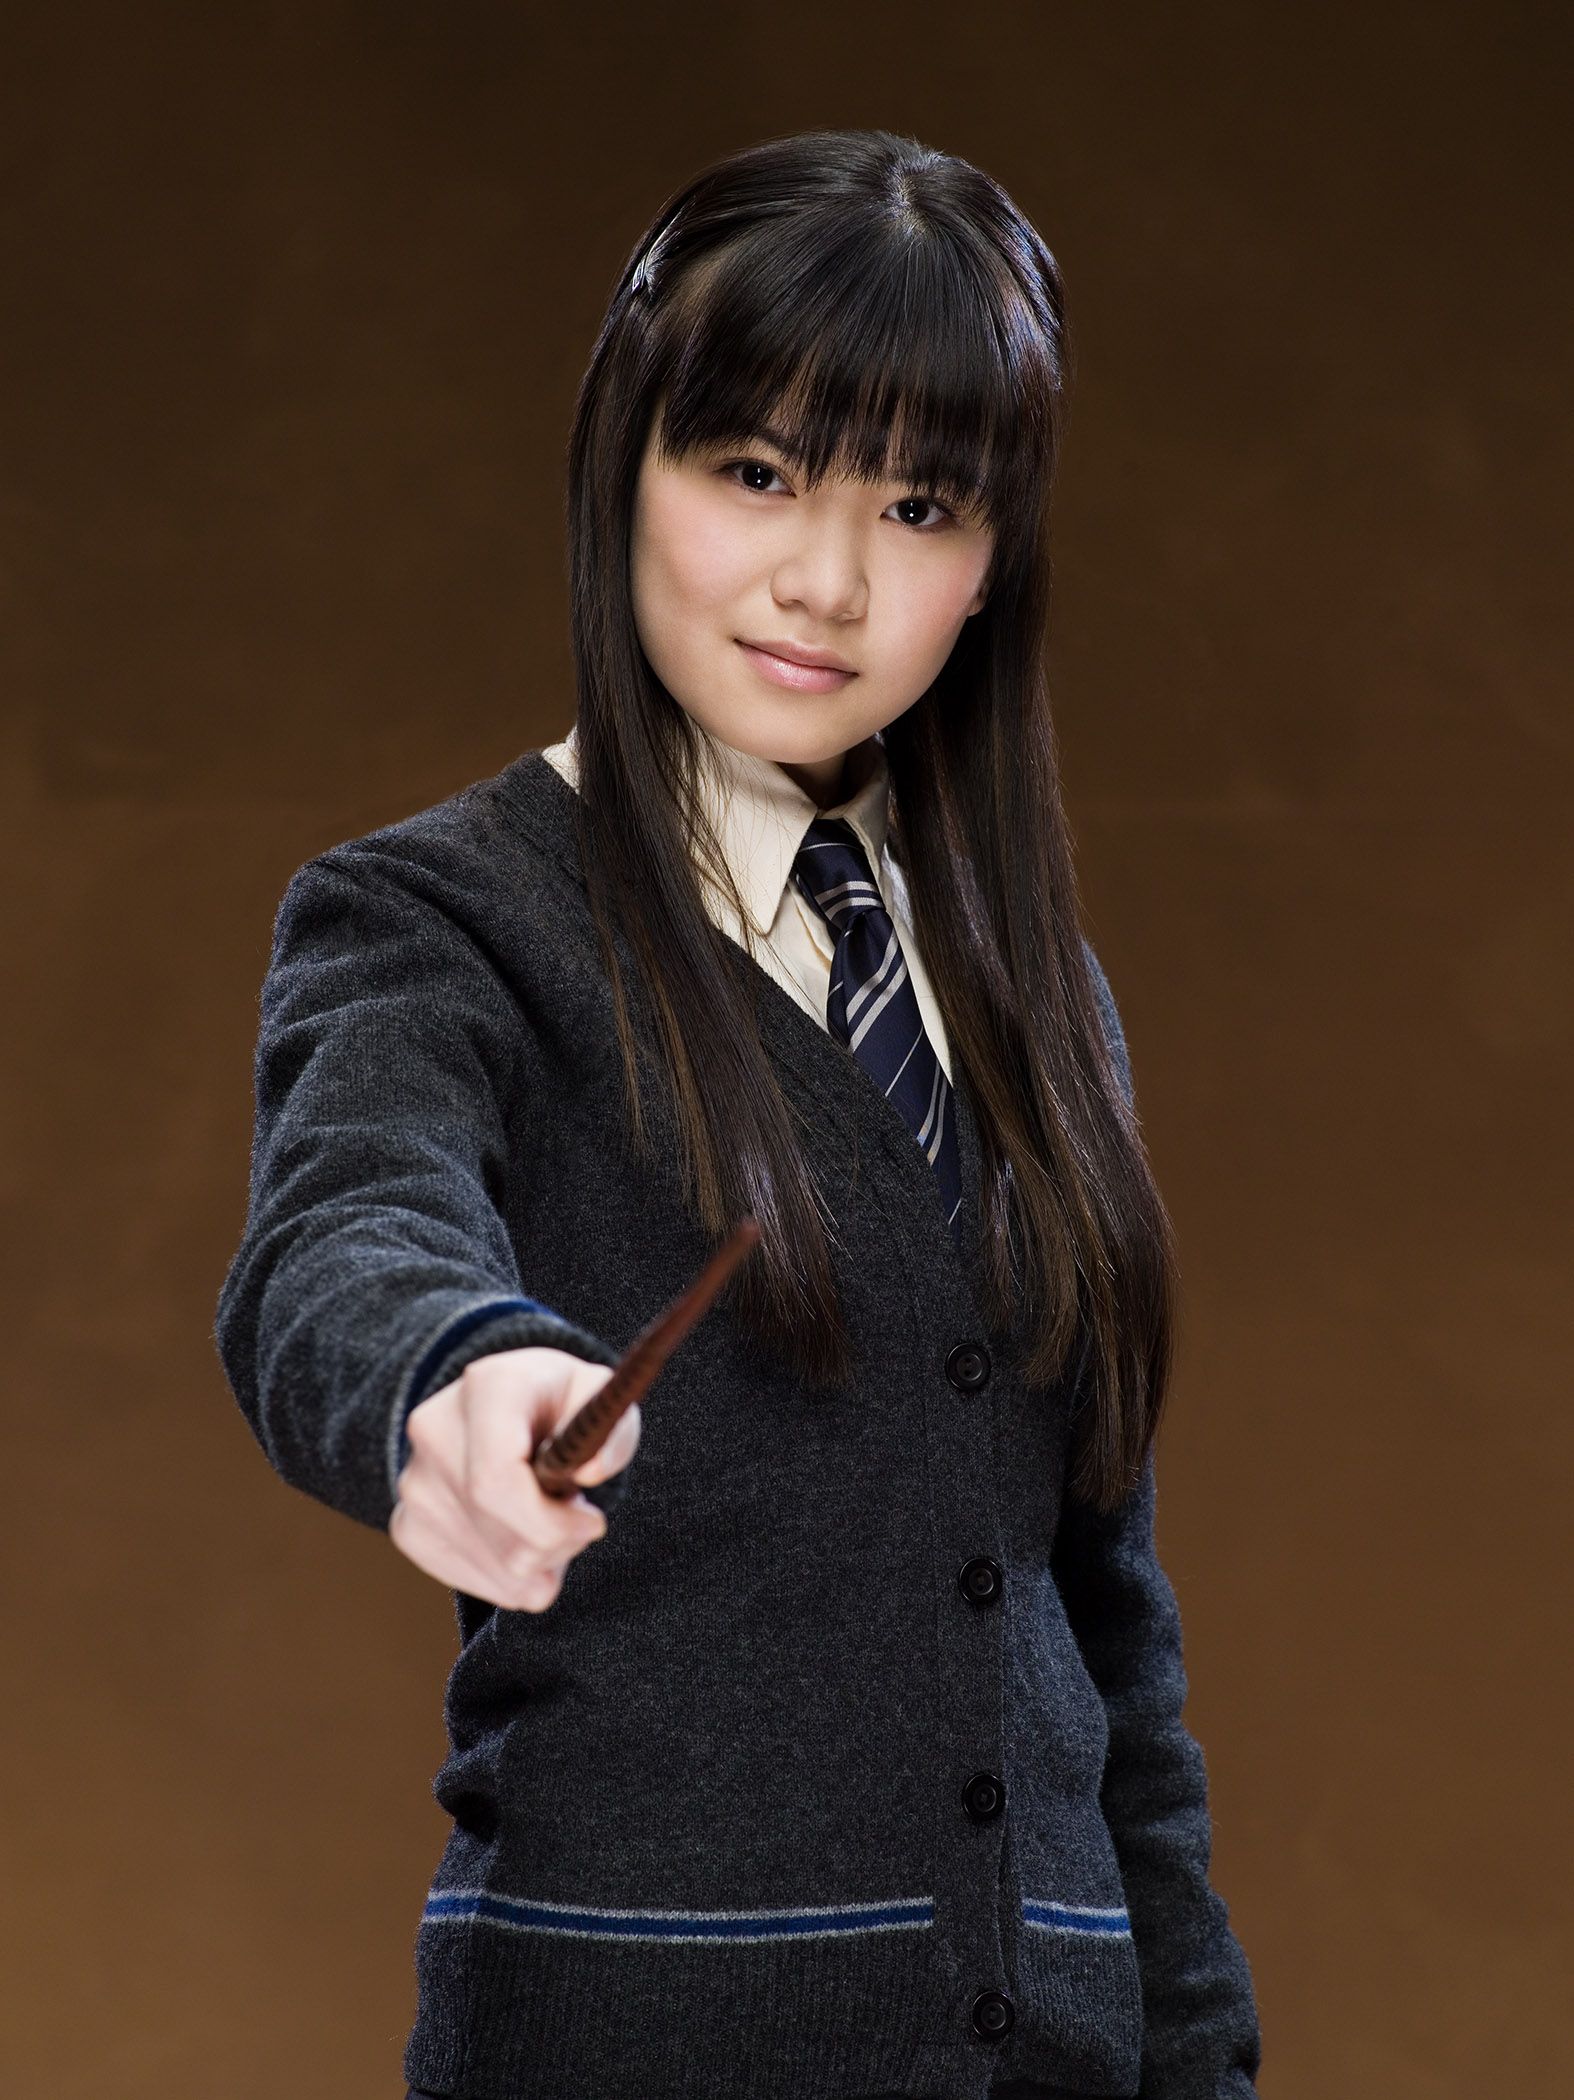 Harry potter valentines, Harry potter female characters, Katie leung